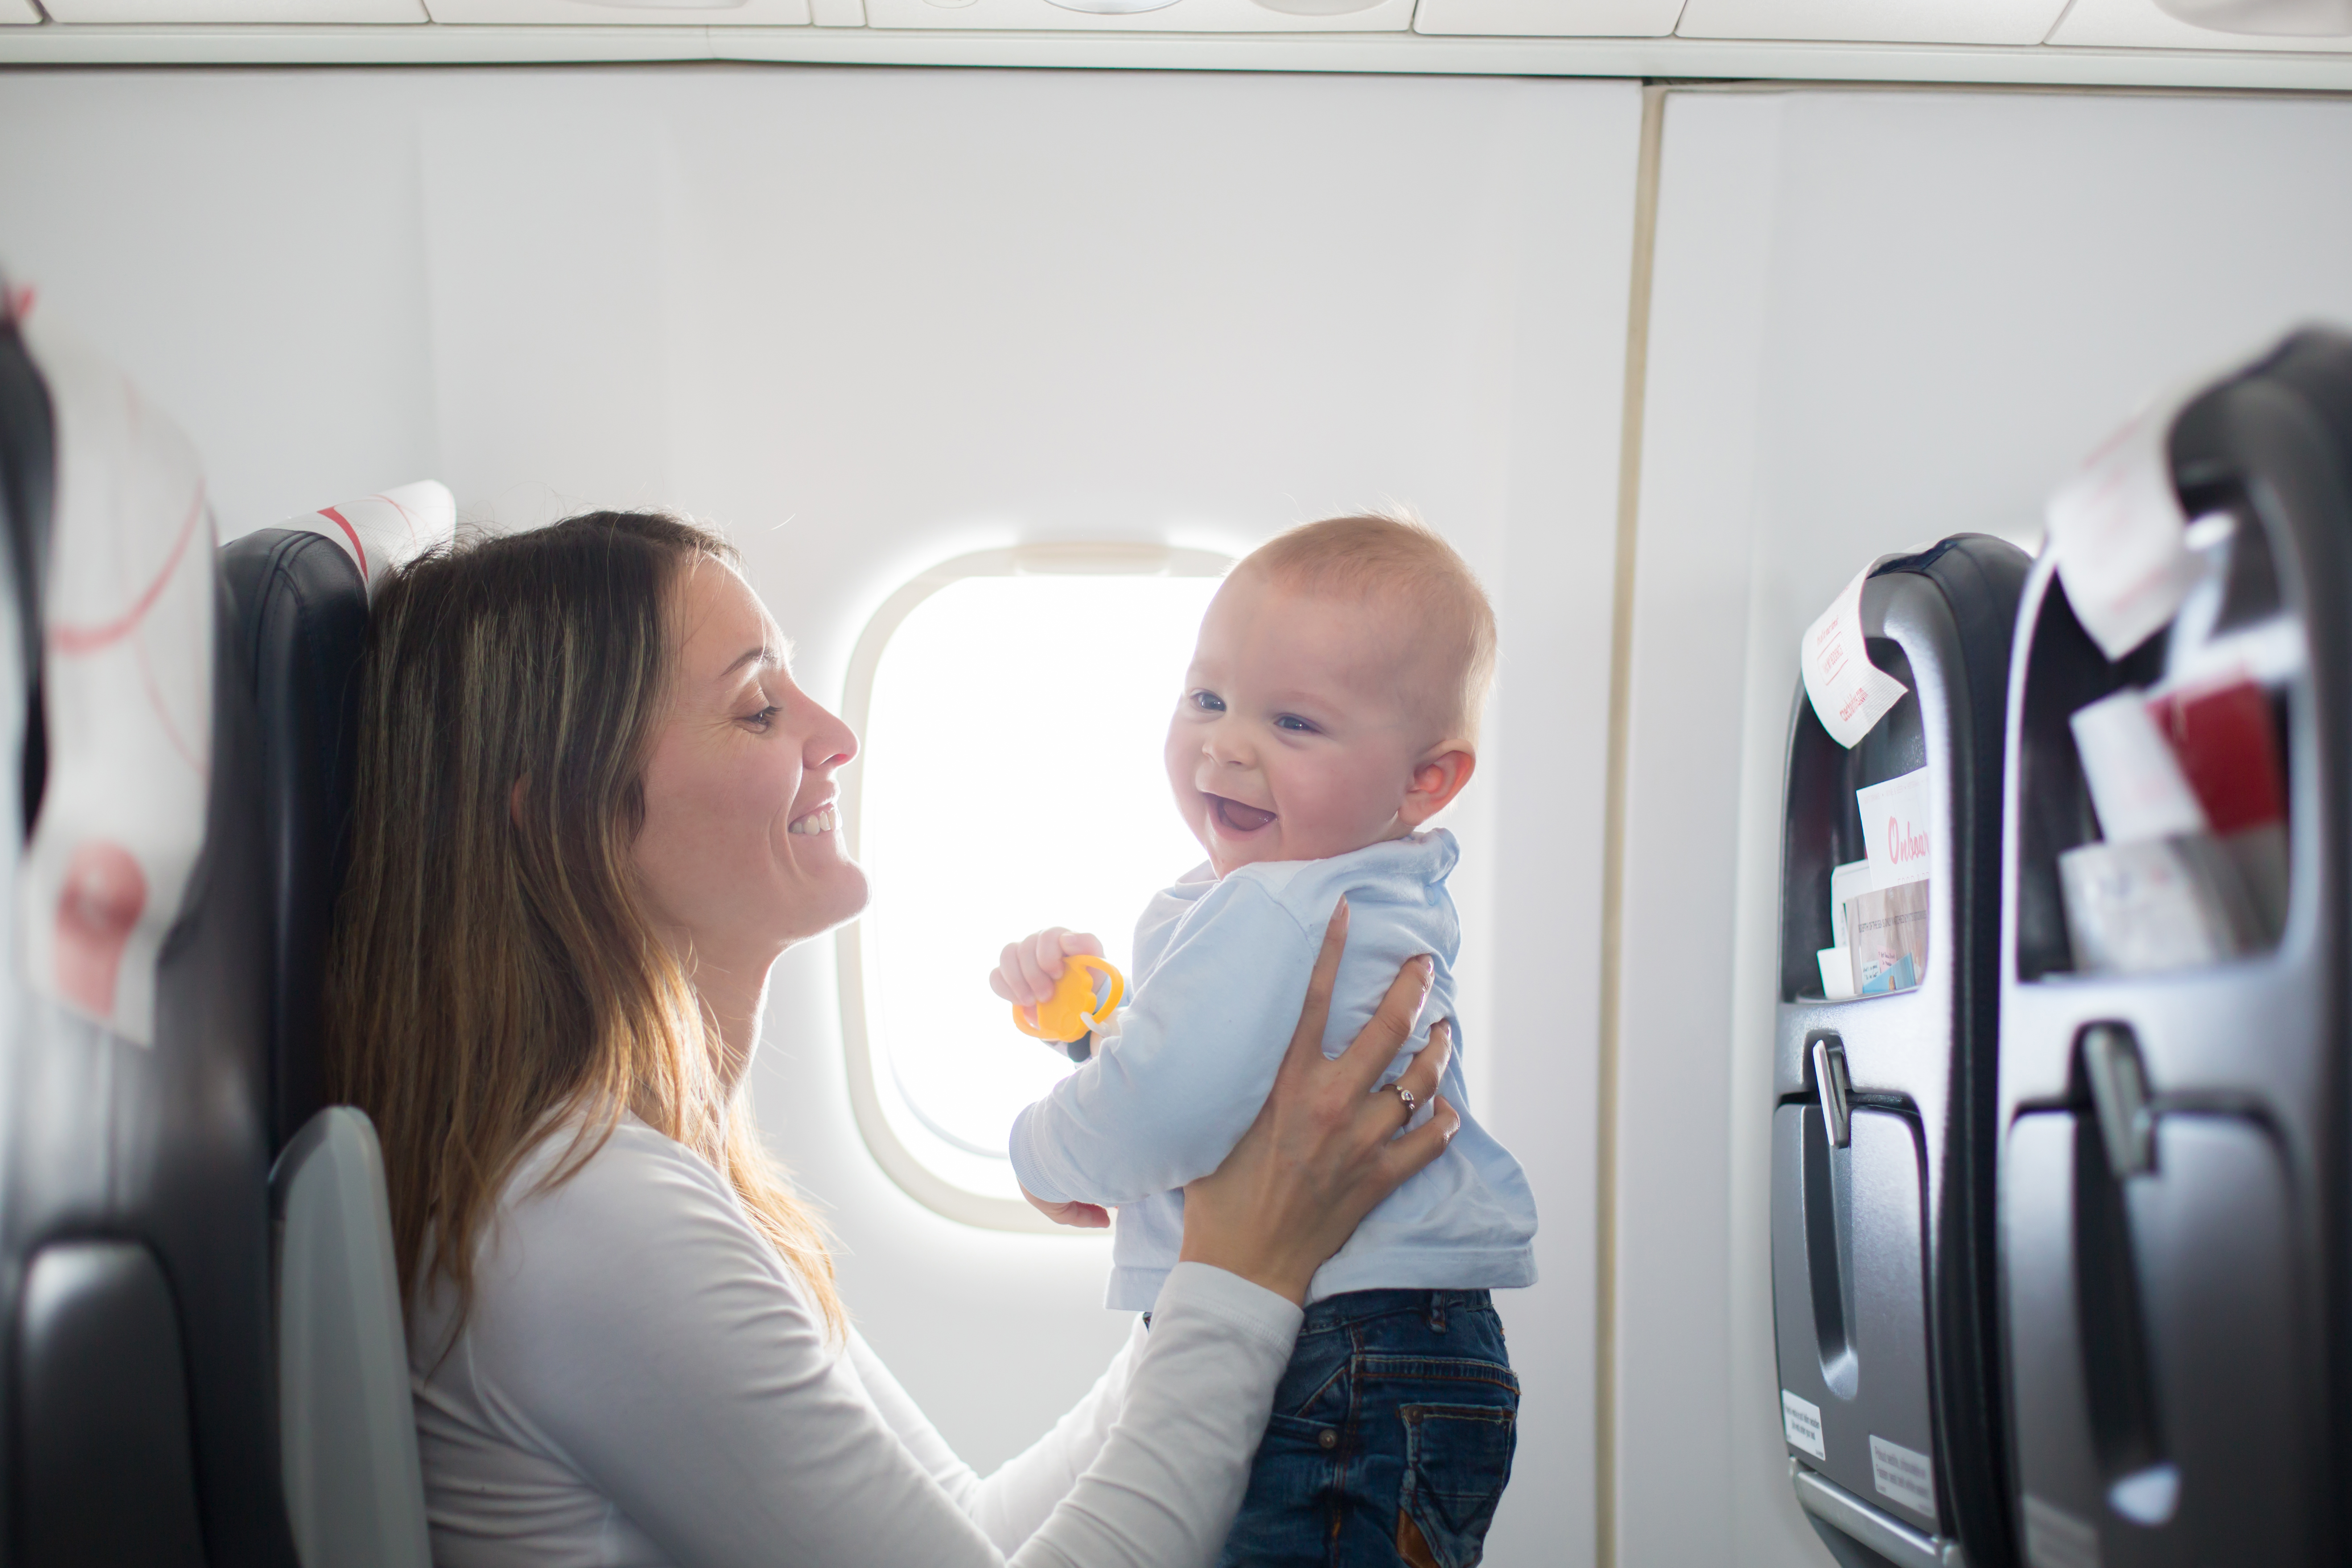 A woman holding a baby in an airplane | Source: Shutterstock